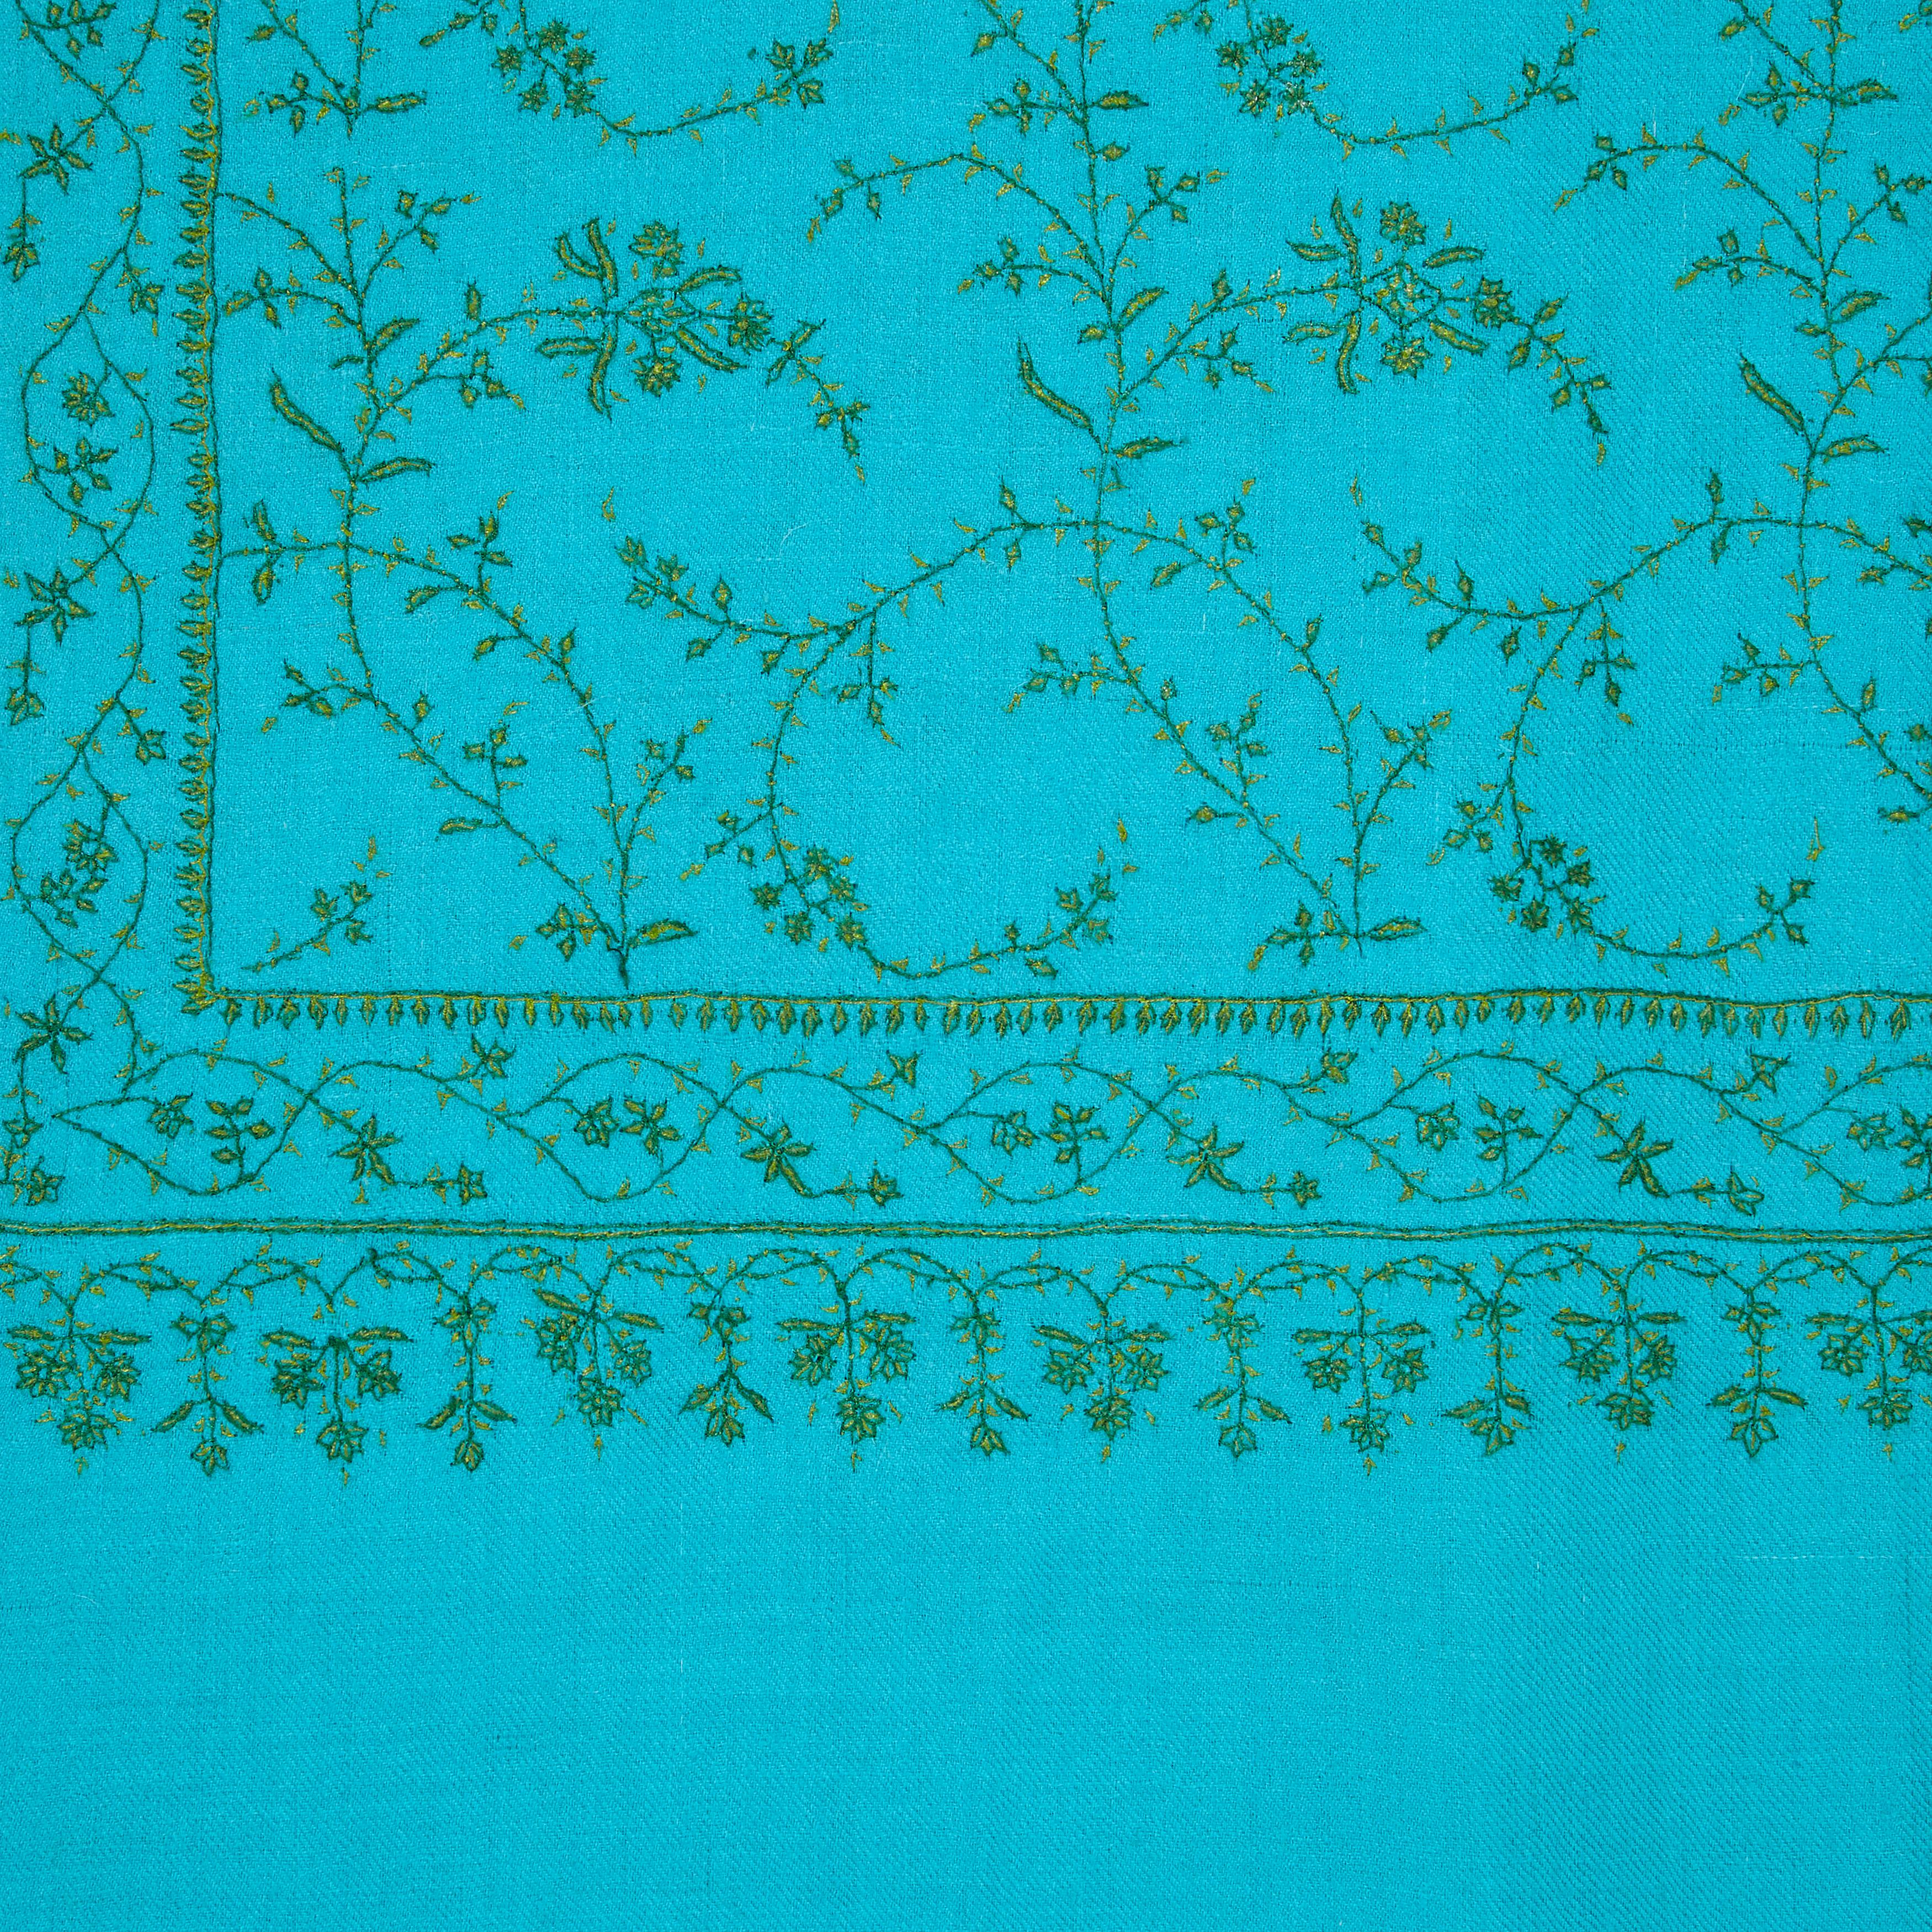 Blue Hand Embroidered 100% Cashmere Shawl in Turquoise Made in Kashmir India